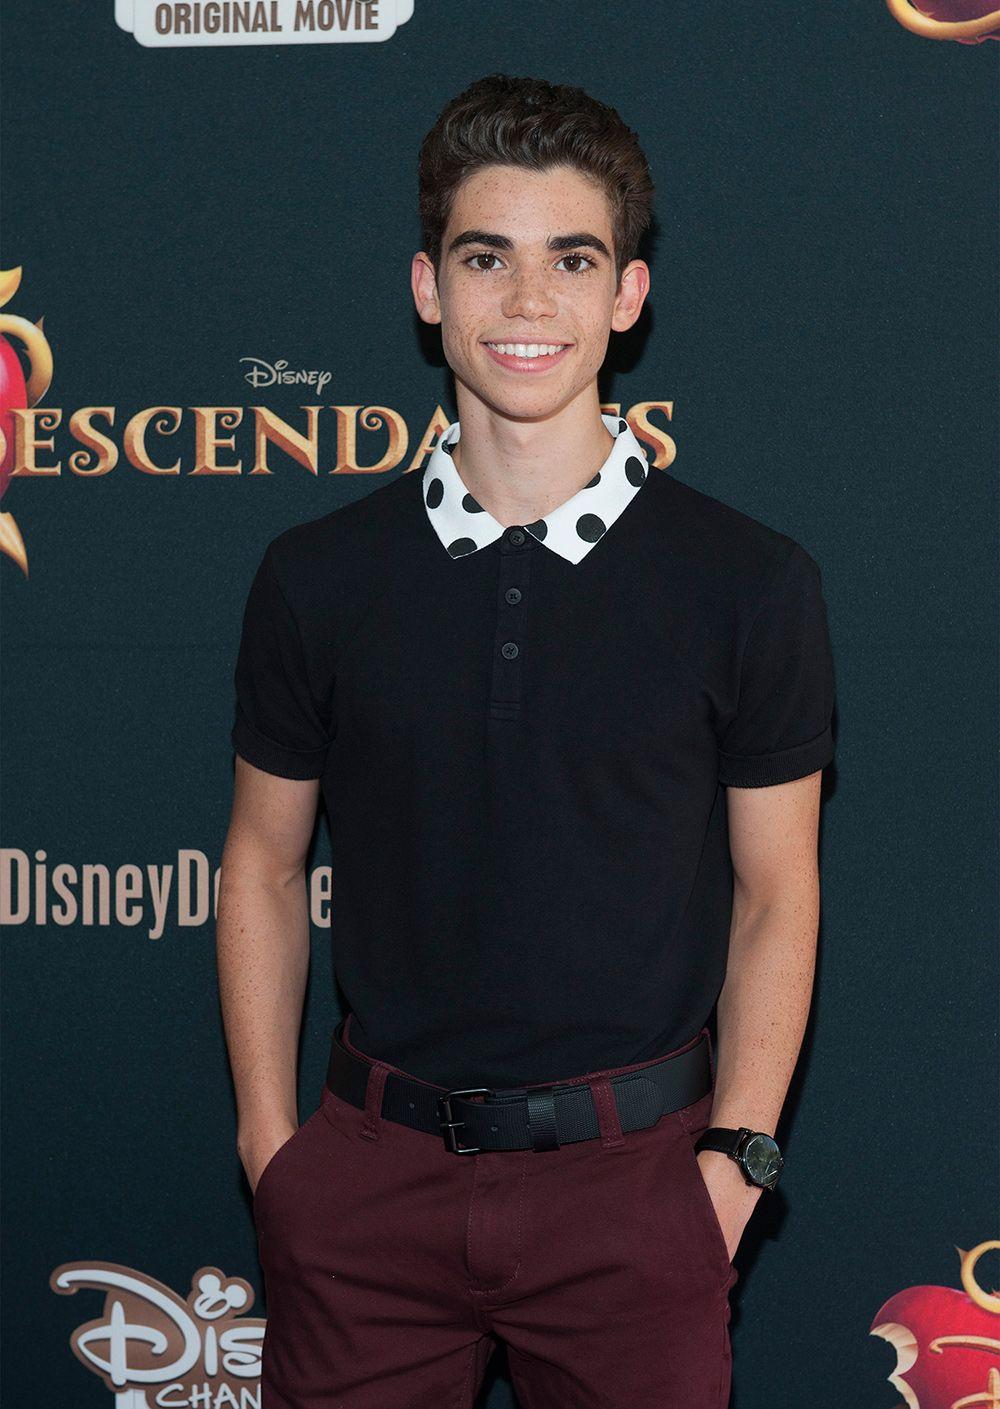 Descendants Premiere: Birthday Party, Concert, and High School